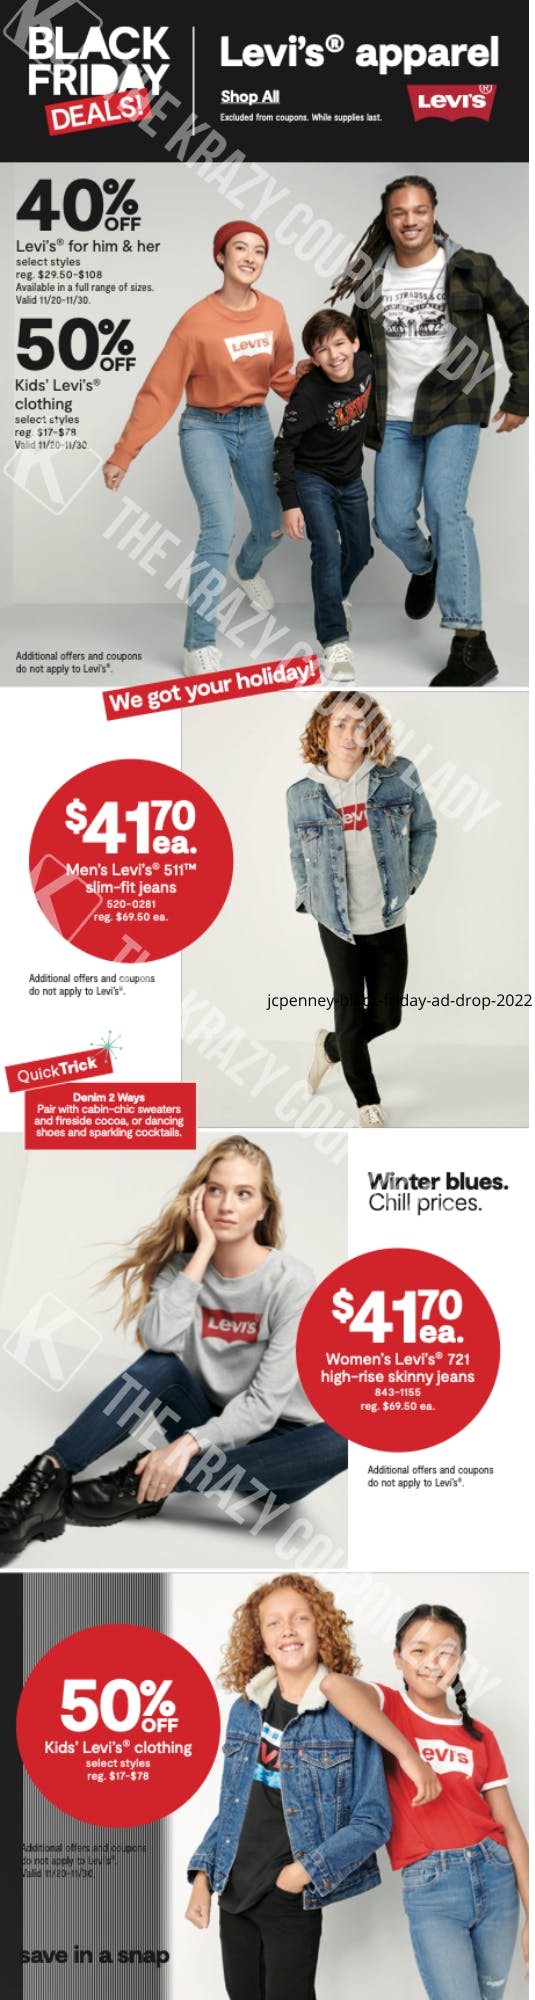 JCPenney Black Friday 2022 Ad & Deals - The Krazy Coupon Lady